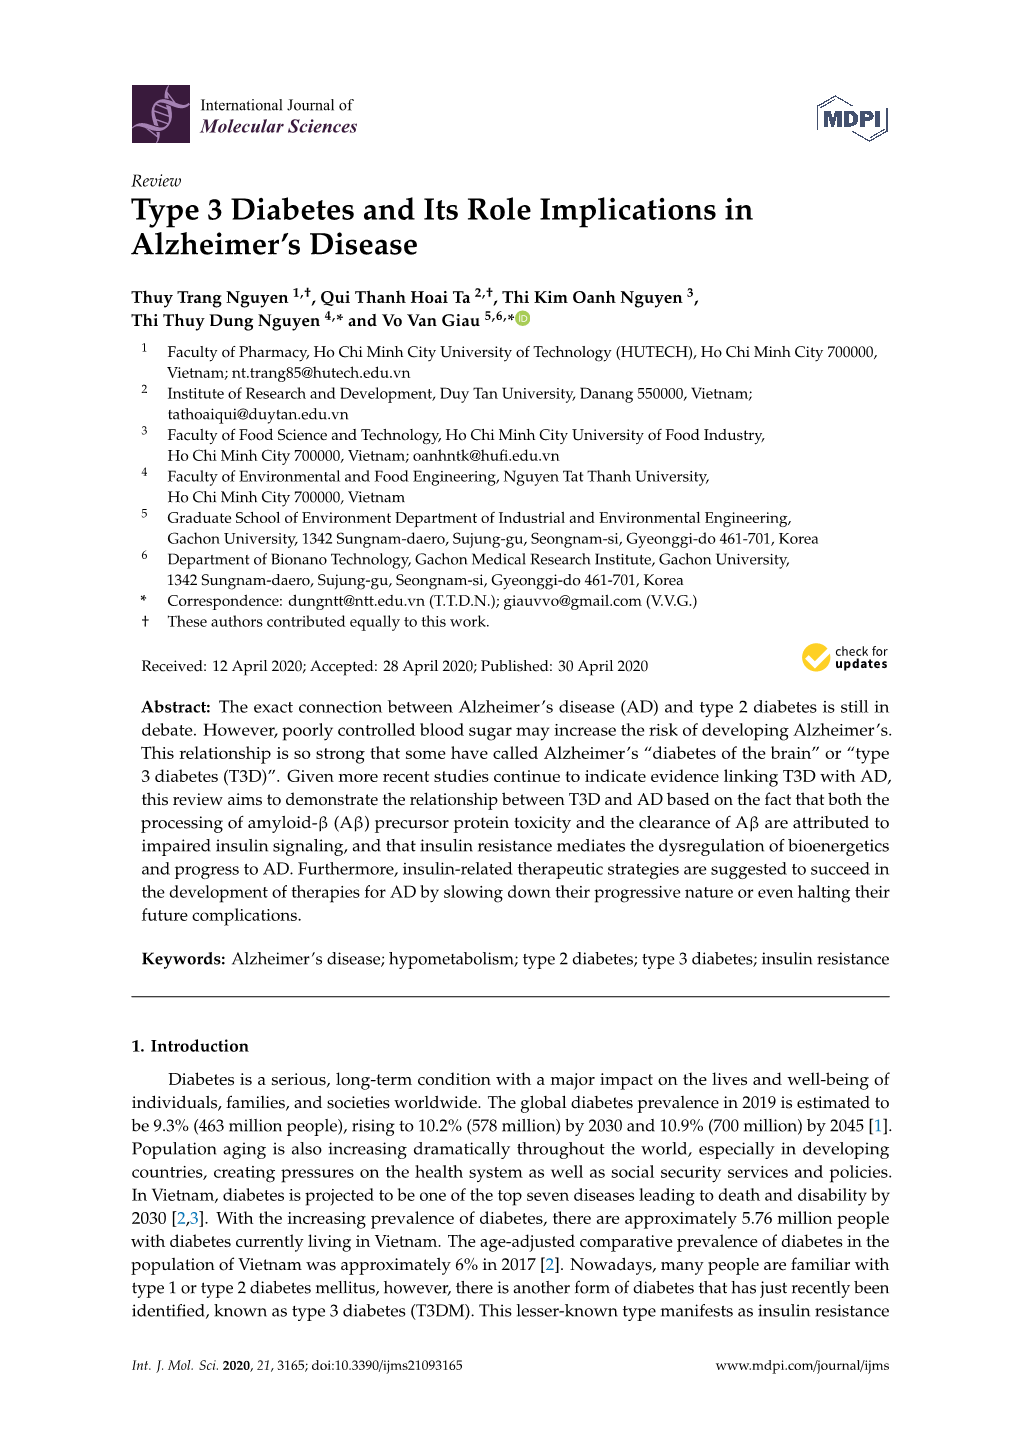 Type 3 Diabetes and Its Role Implications in Alzheimer's Disease